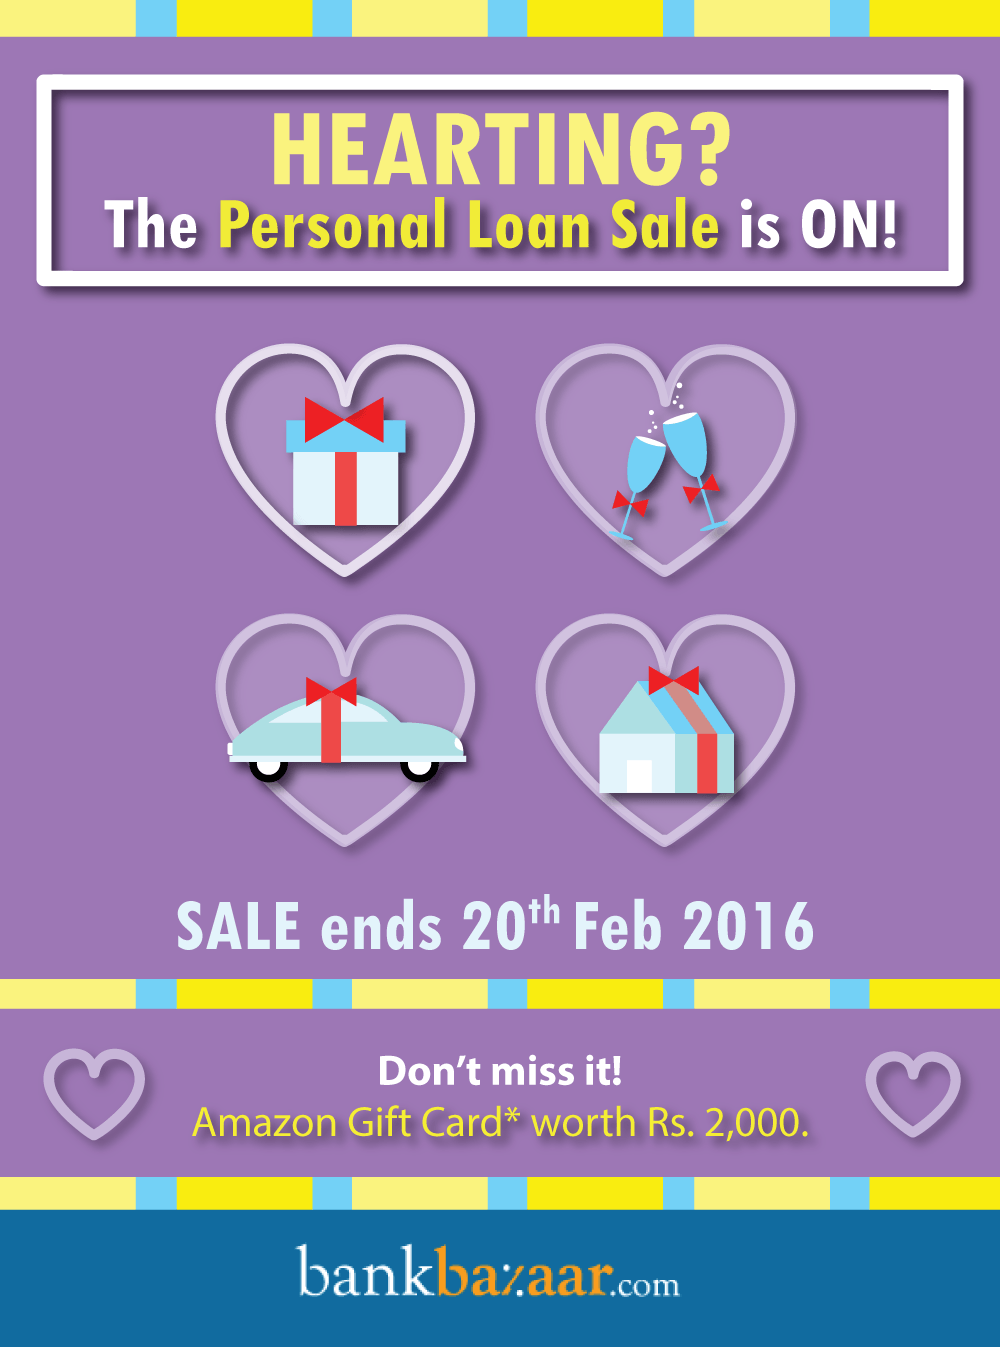 The Personal Loan Sale is on